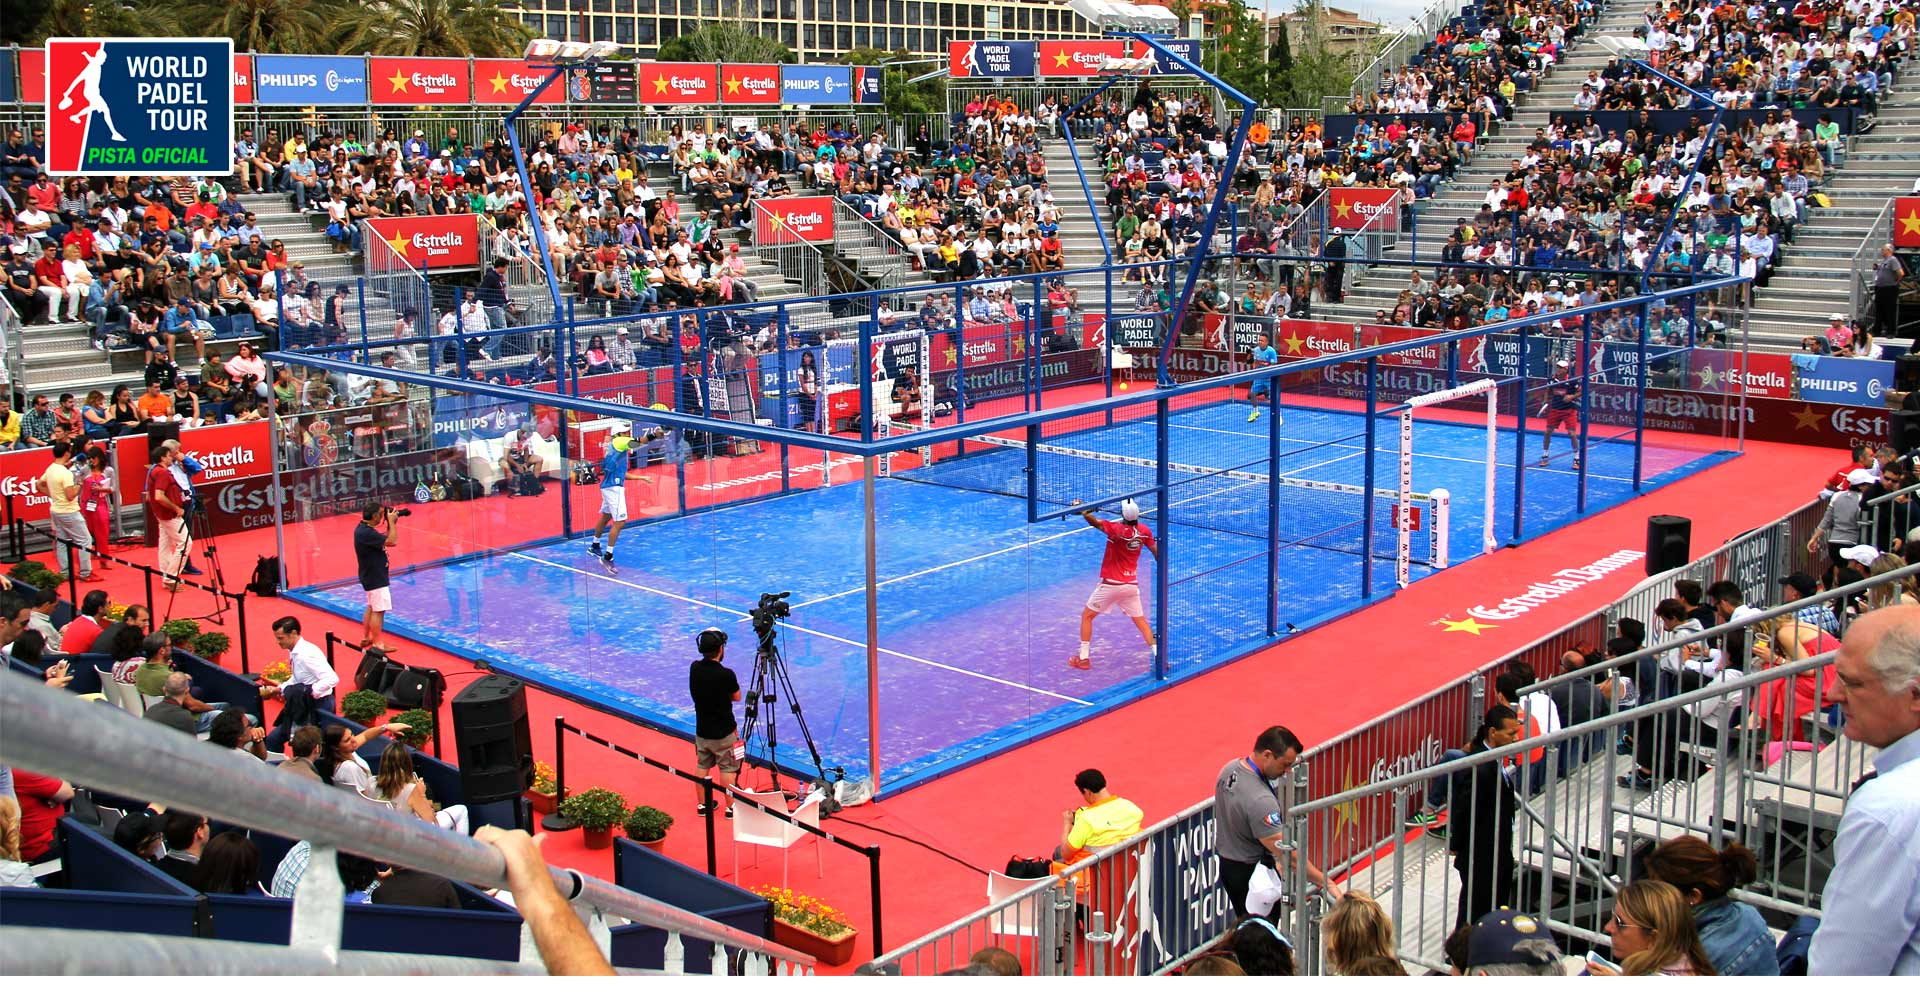 About Padel